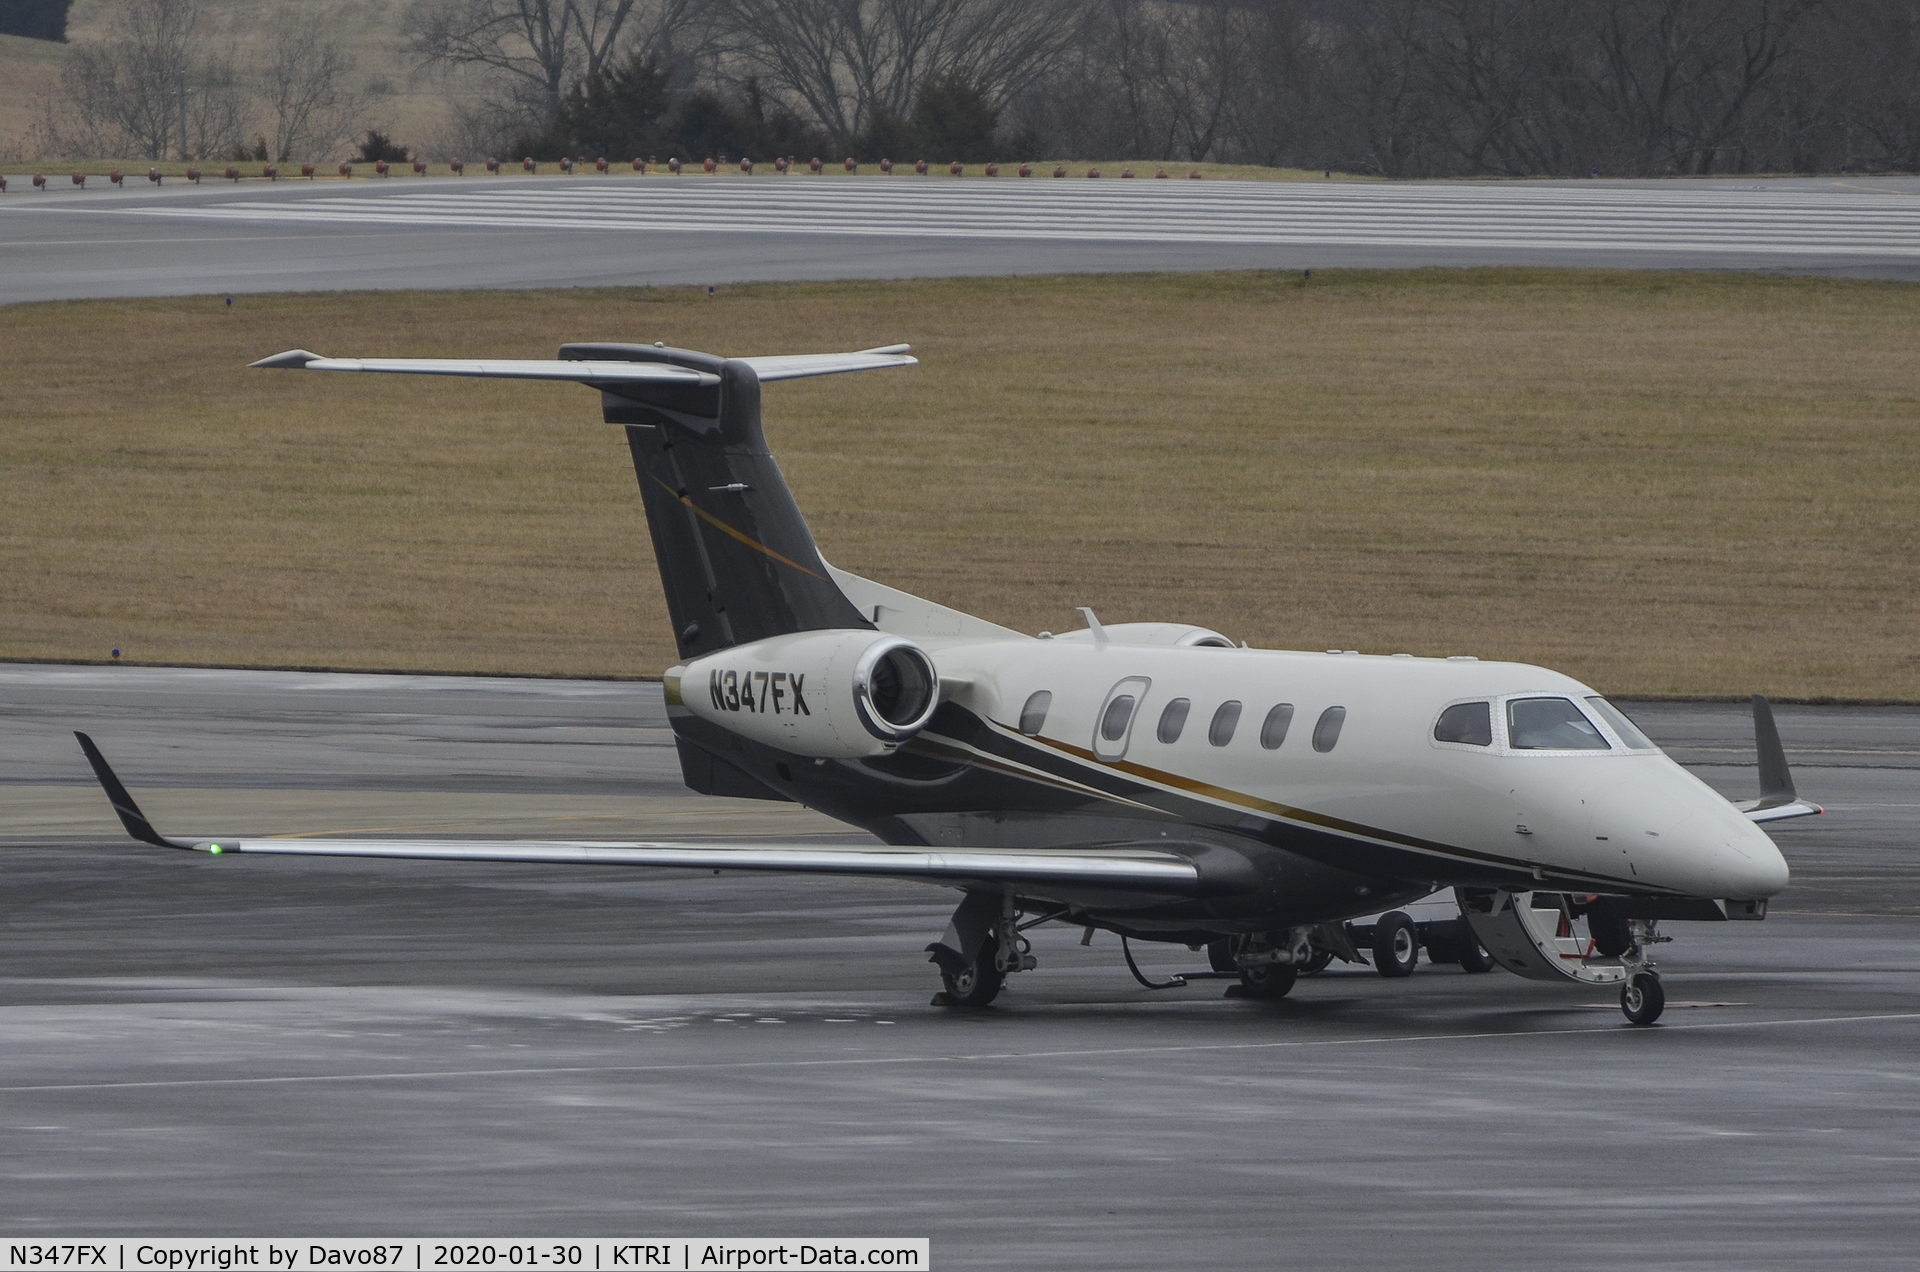 N347FX, 2012 Embraer EMB-505 Phenom 300 C/N 50500094, Parked at Tri-Cities Airport (KTRI) in East Tennessee.